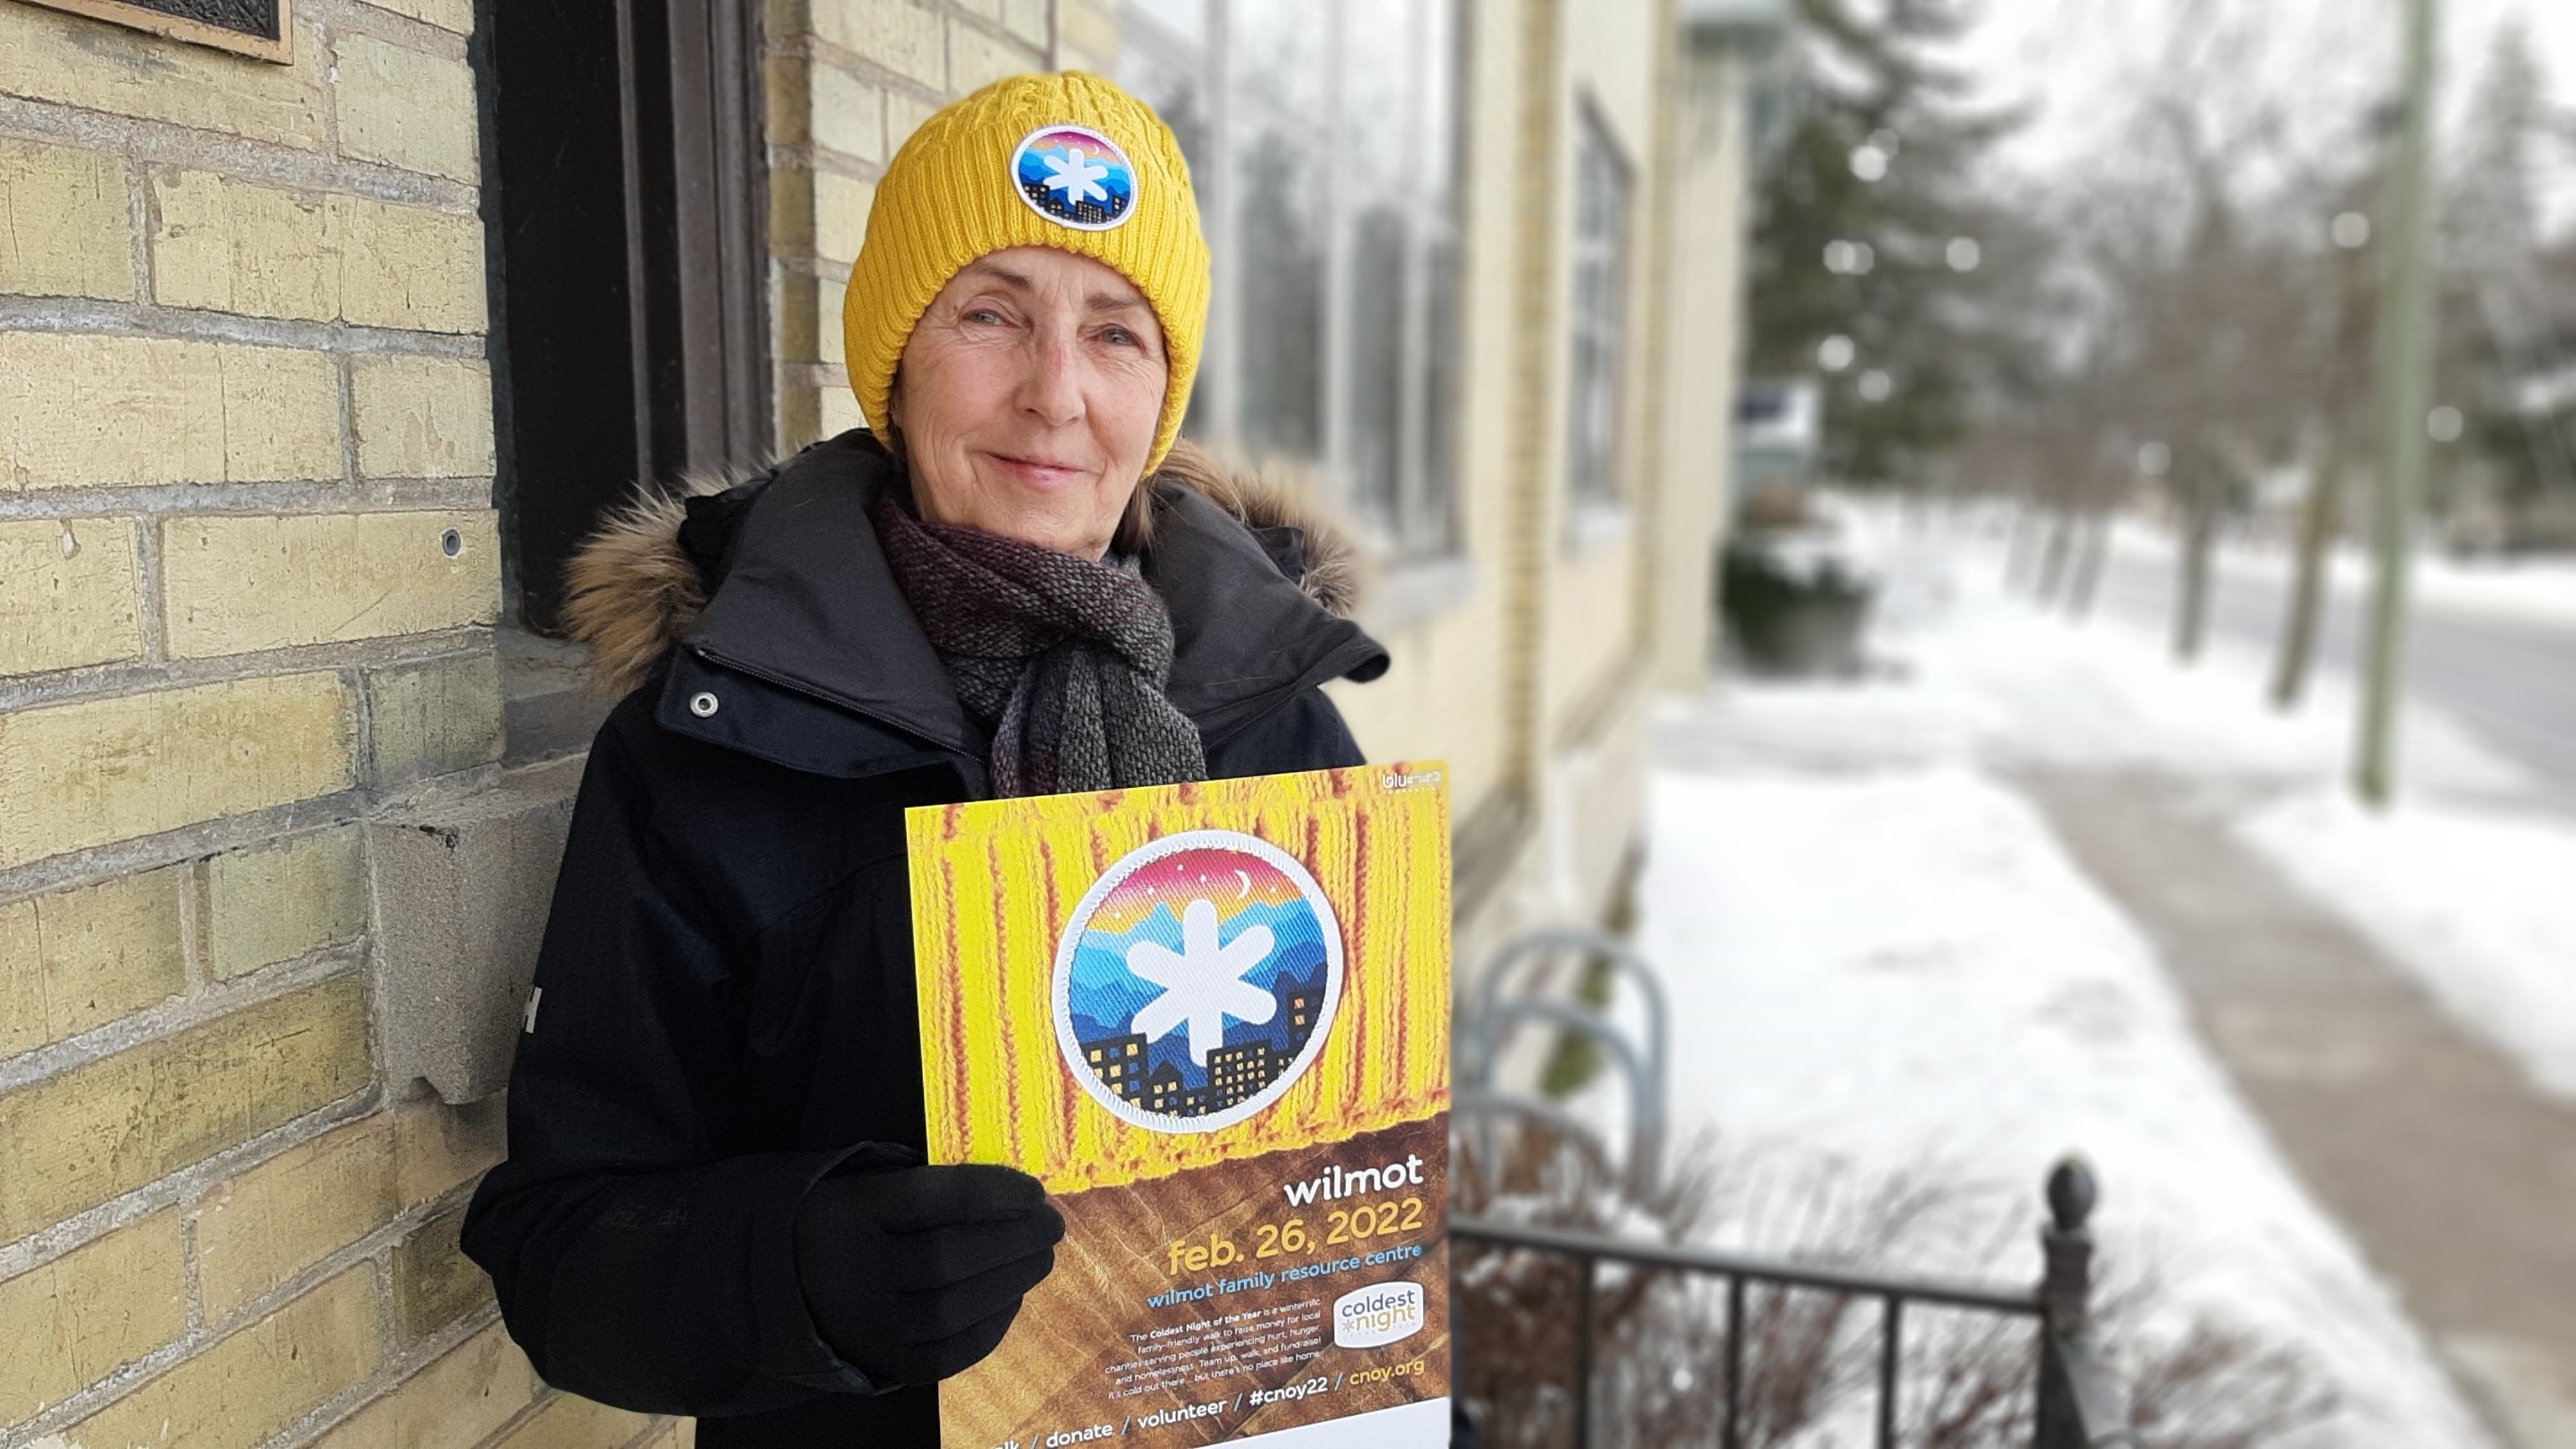 Wilmot Family Resource Centre’s executive director Trisha Robinson hopes this year’s Coldest Night of the Year event will raise $25,000 for people who are experiencing hurt, hunger and homelessness. (Photo: Nigel Gordijk)